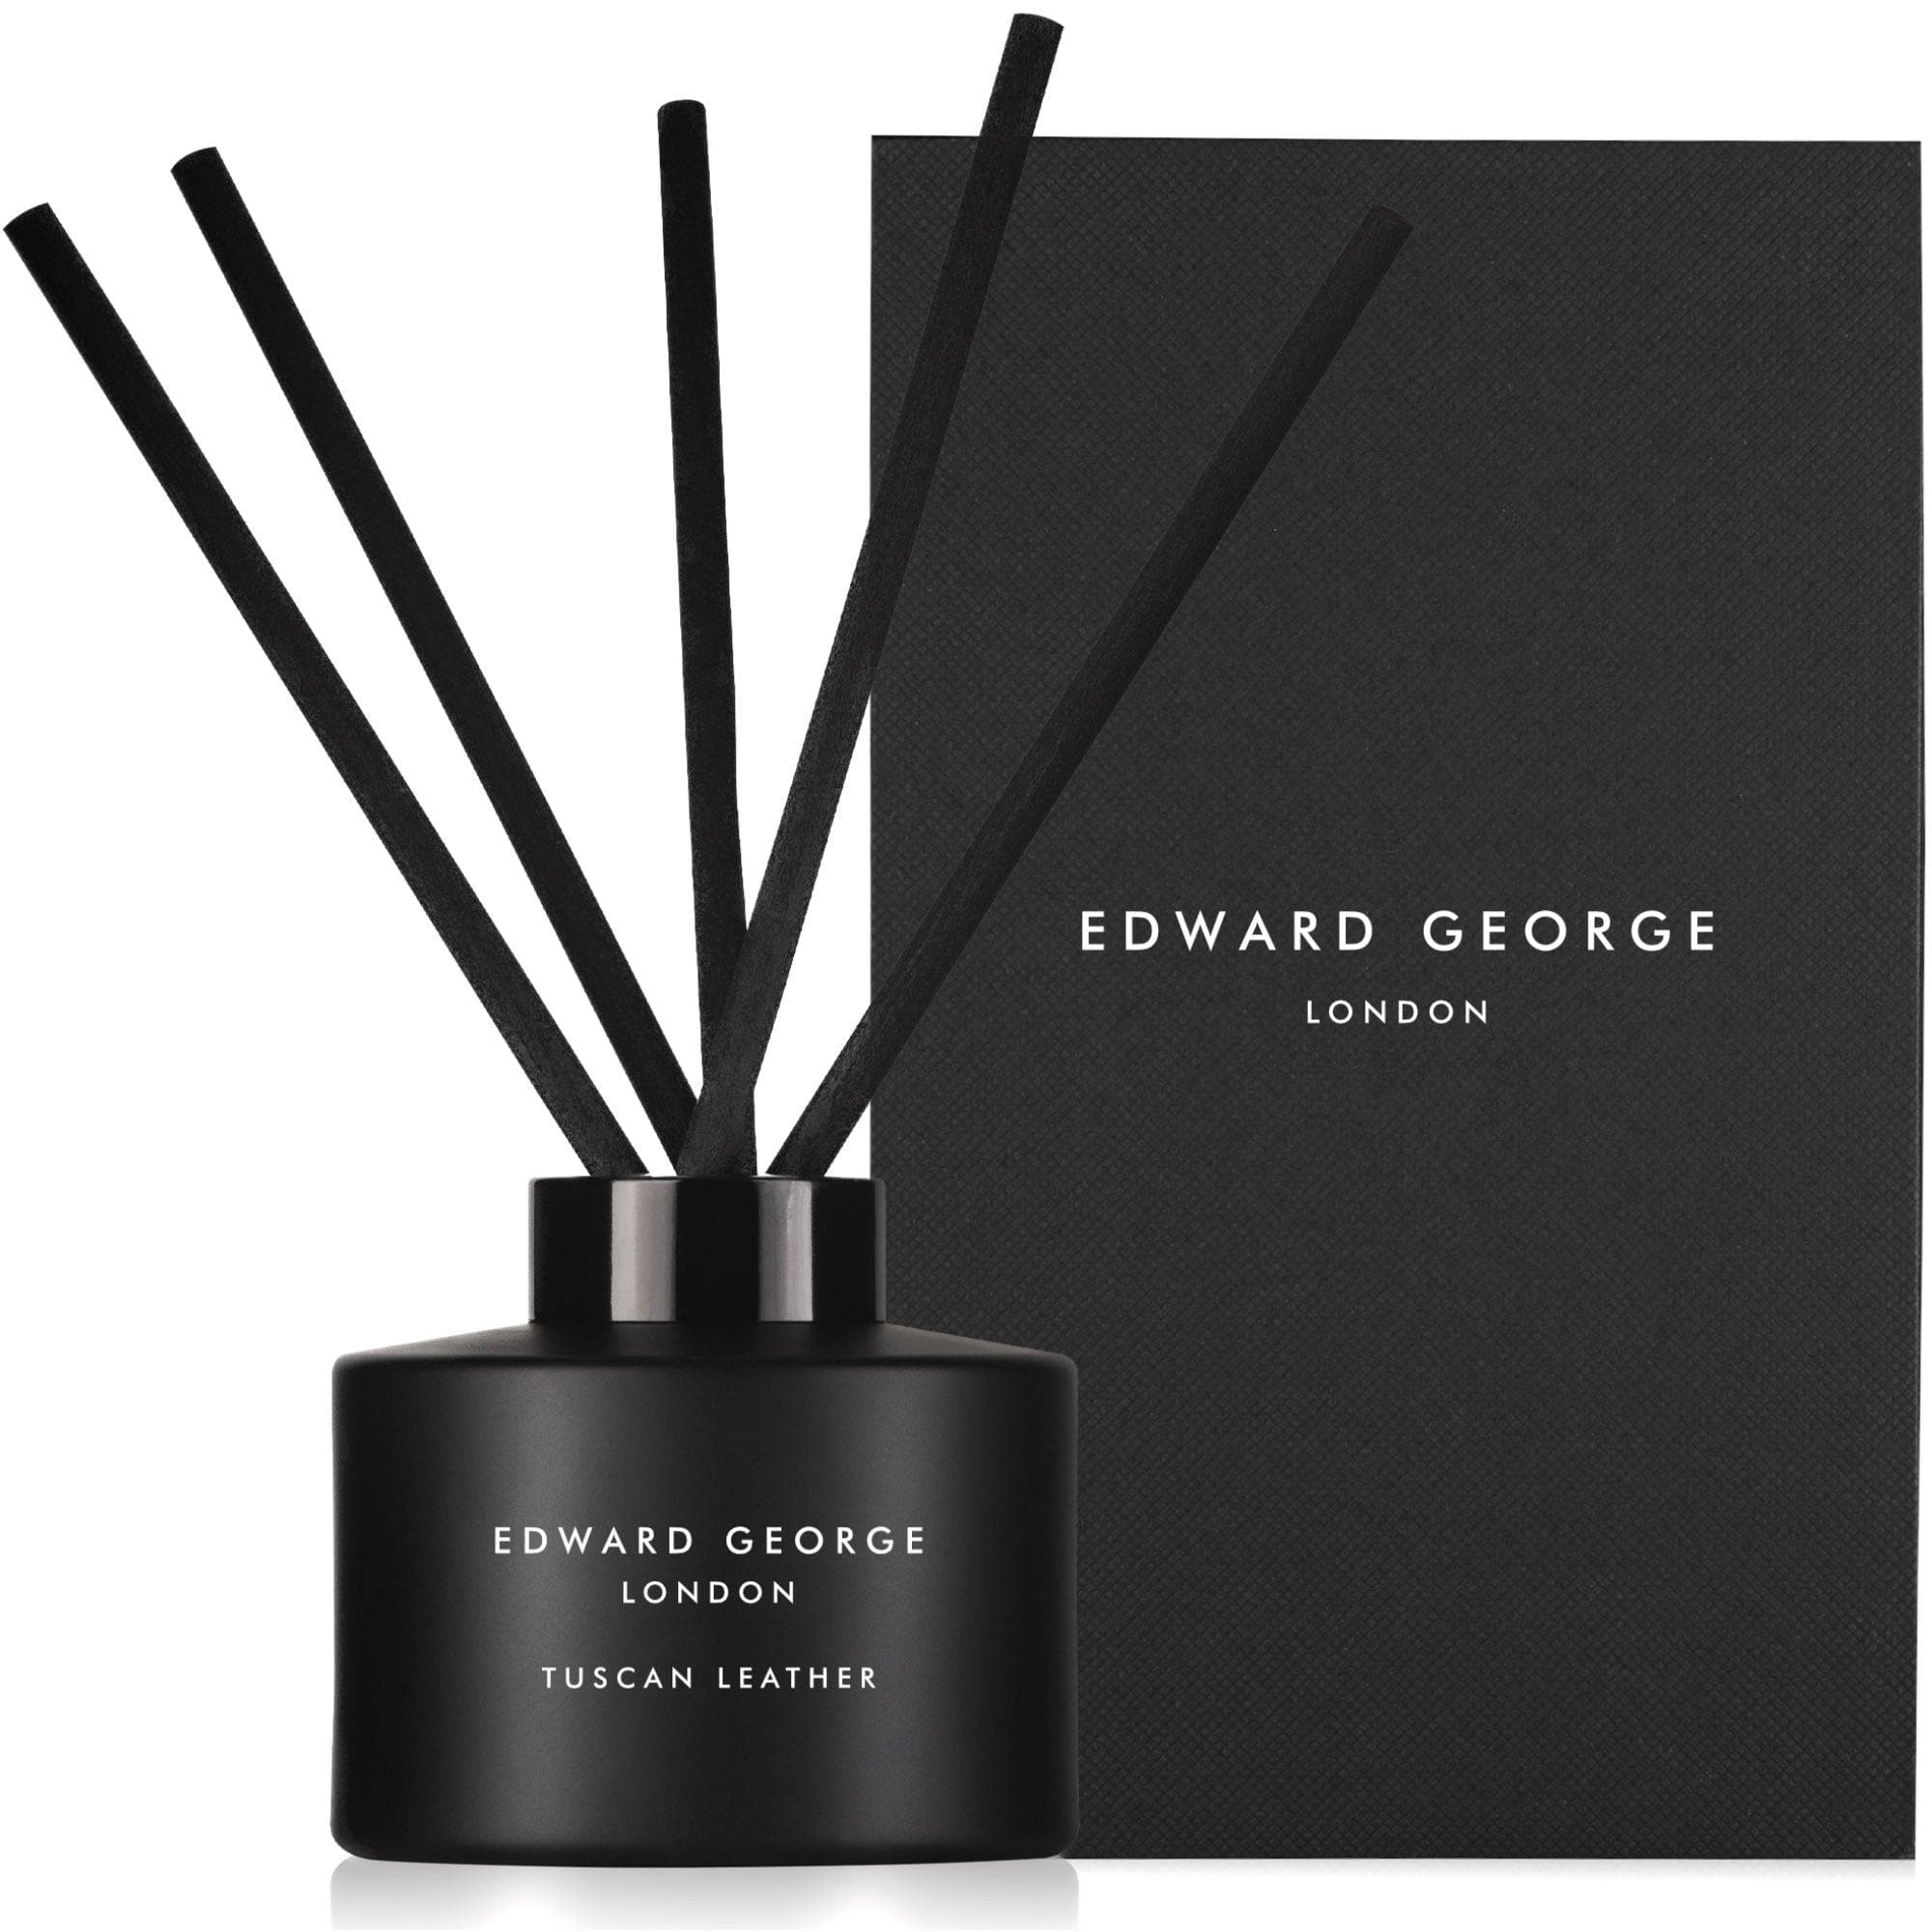 tuscan leather reed diffusers refills home fragrance decor room edward george london infographic luxury gift ritual scented england sticks scent oil diffuser refill women men black